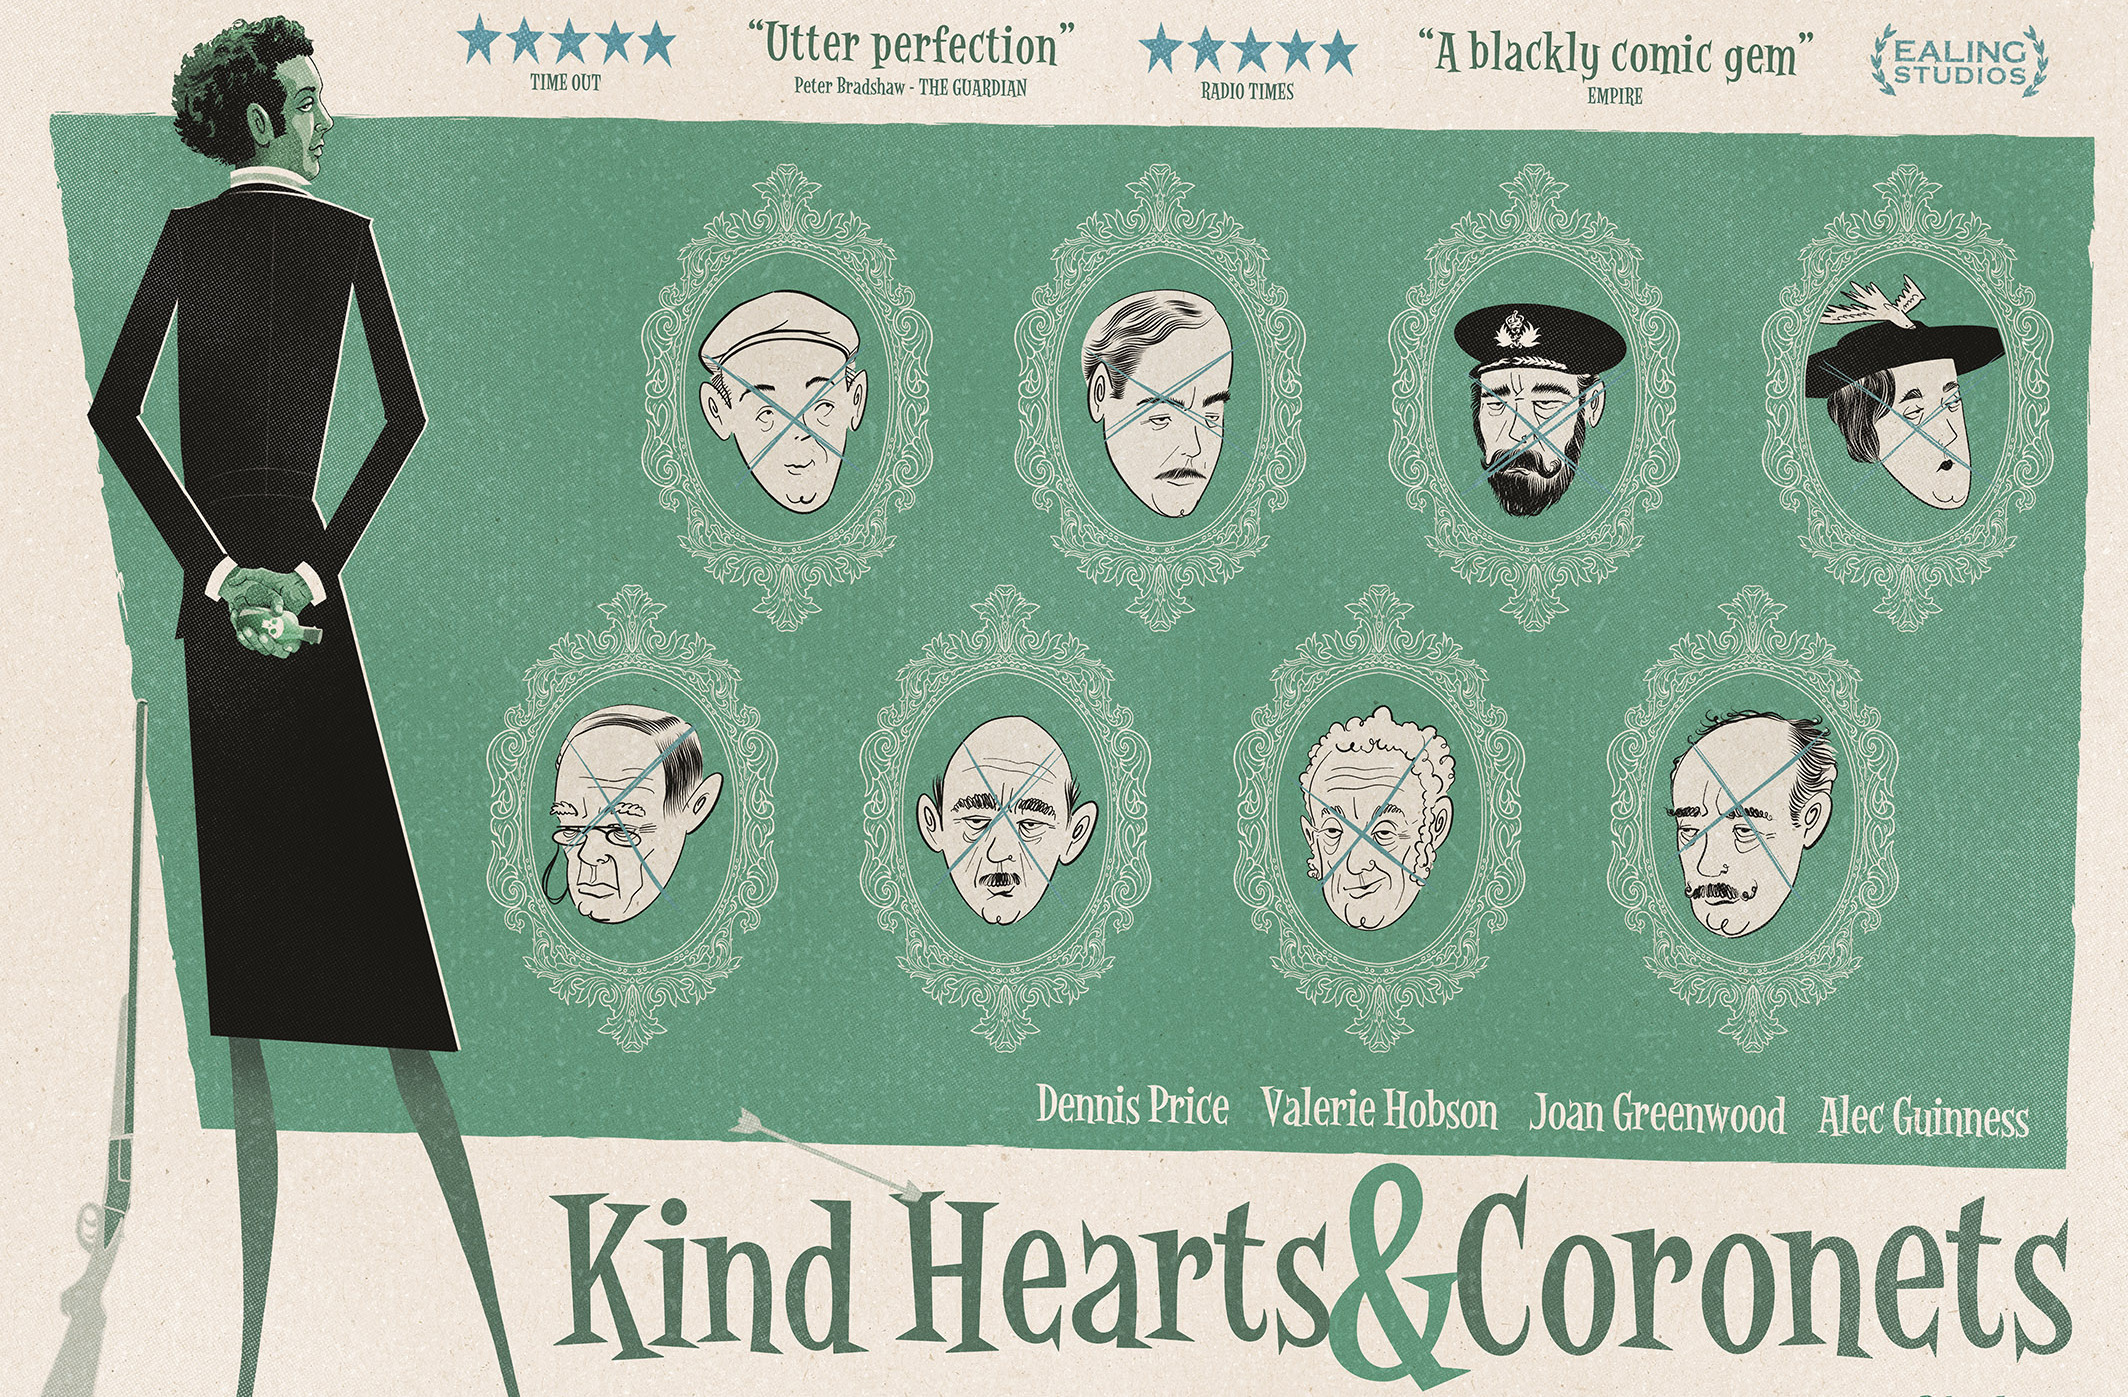 42 Facts about the movie Kind Hearts and Coronets - Facts.net